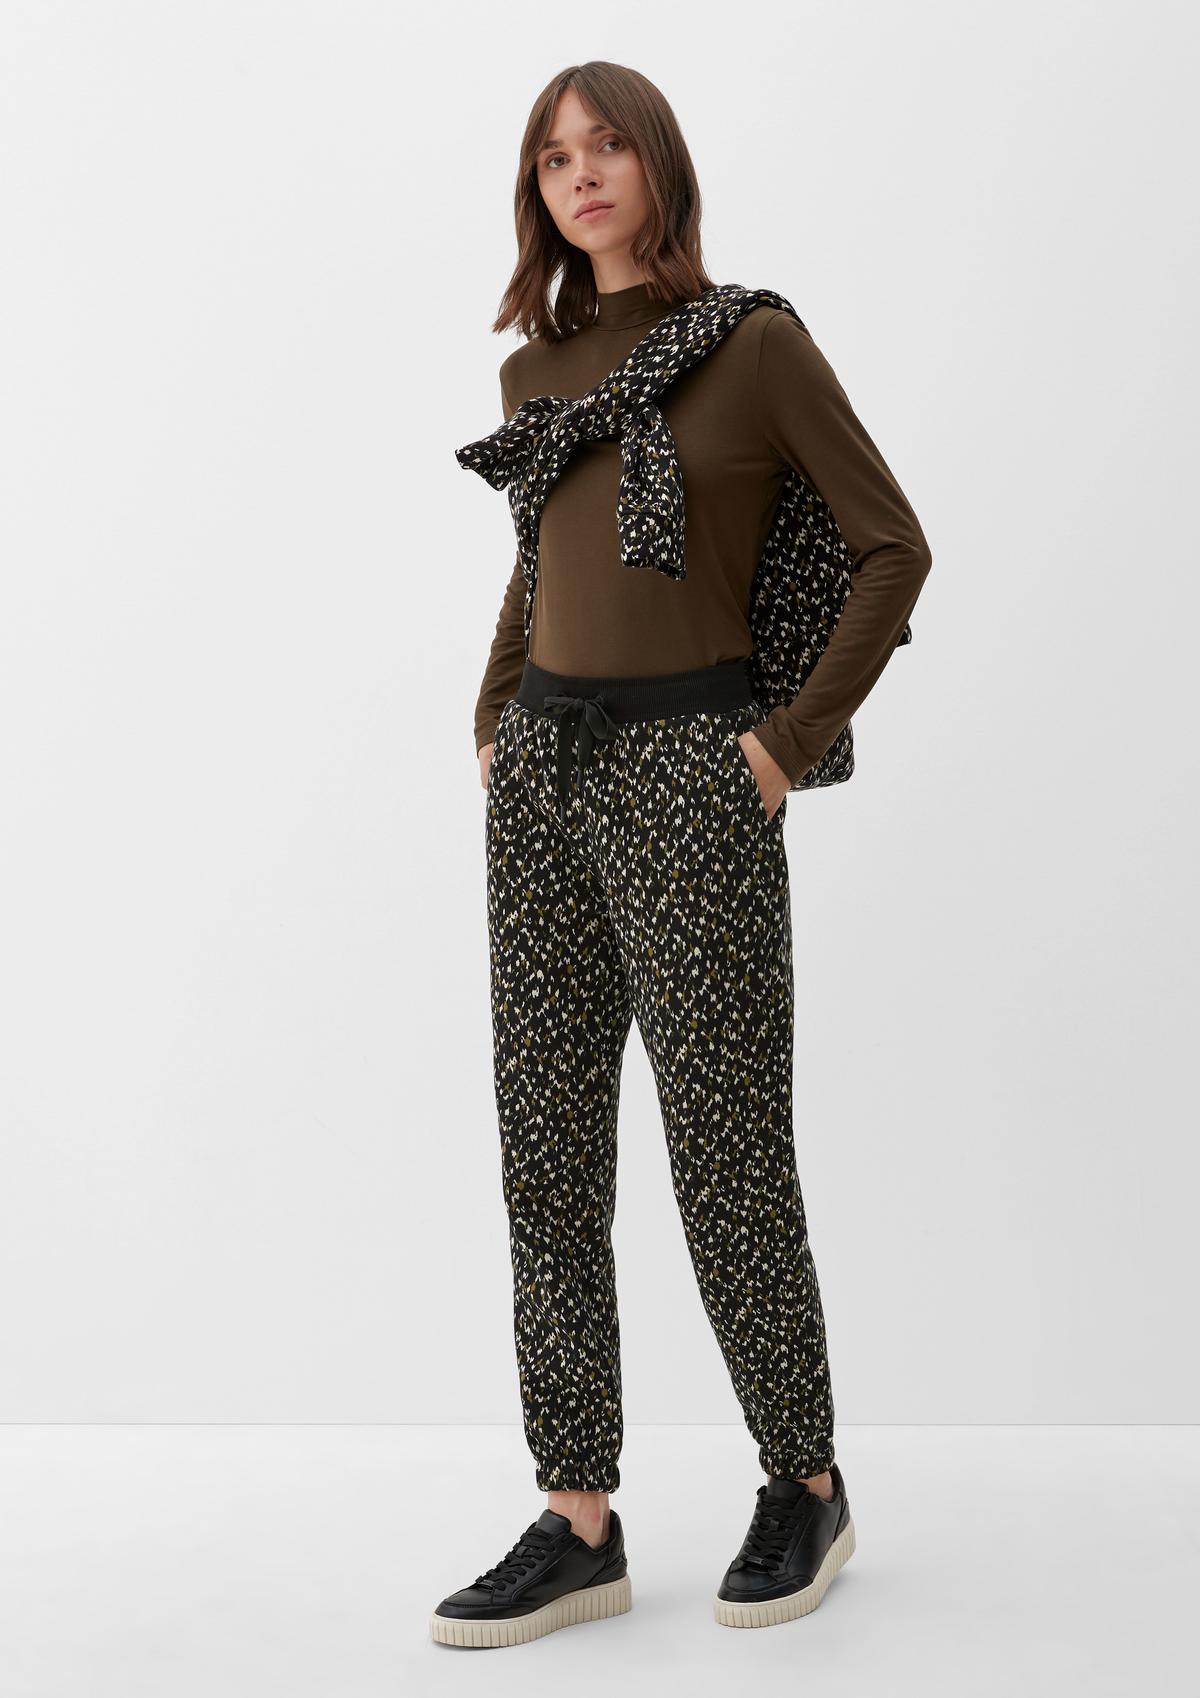 s.Oliver Tracksuit bottoms with an all-over pattern